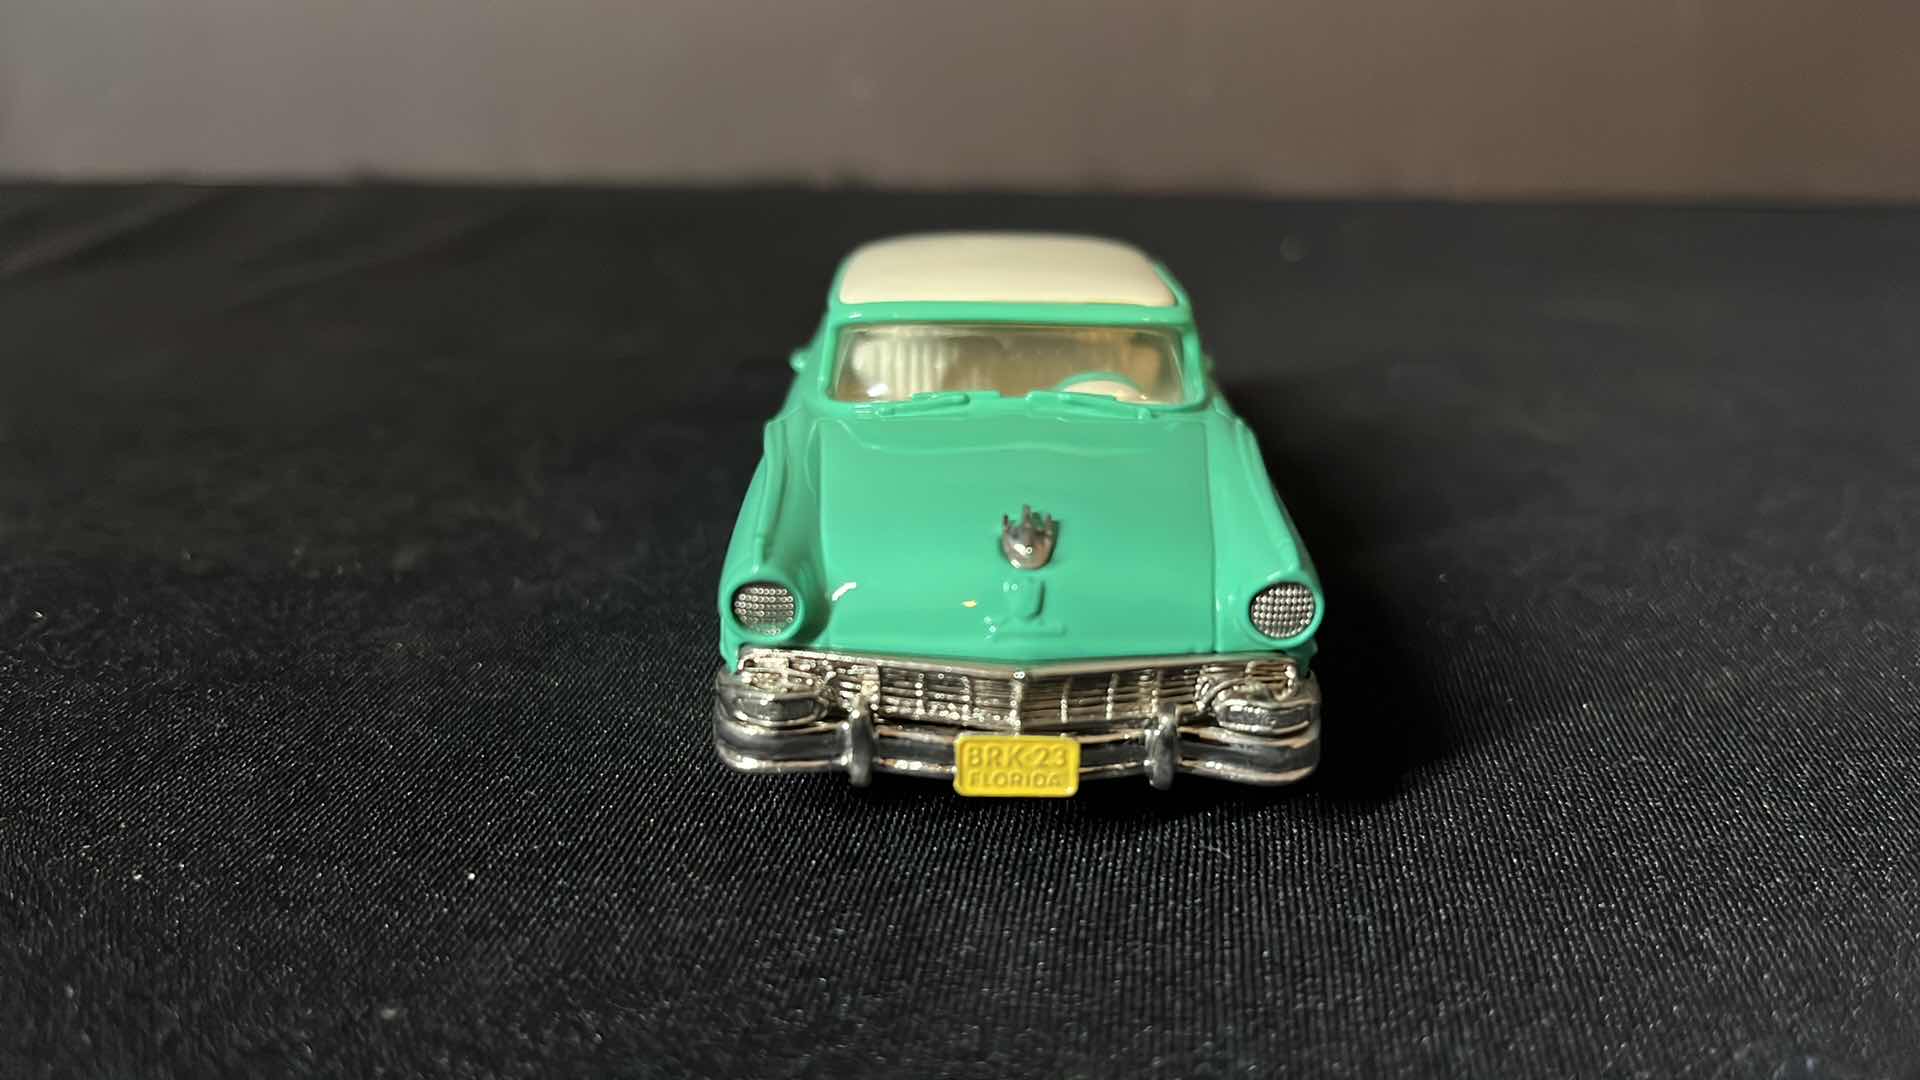 Photo 2 of VINTAGE BROOKLIN COLLECTION DIE-CAST METAL 1956 FORD FAIRLANE 2 DOOR VICTORIA, MADE IN ENGLAND (No. 23)